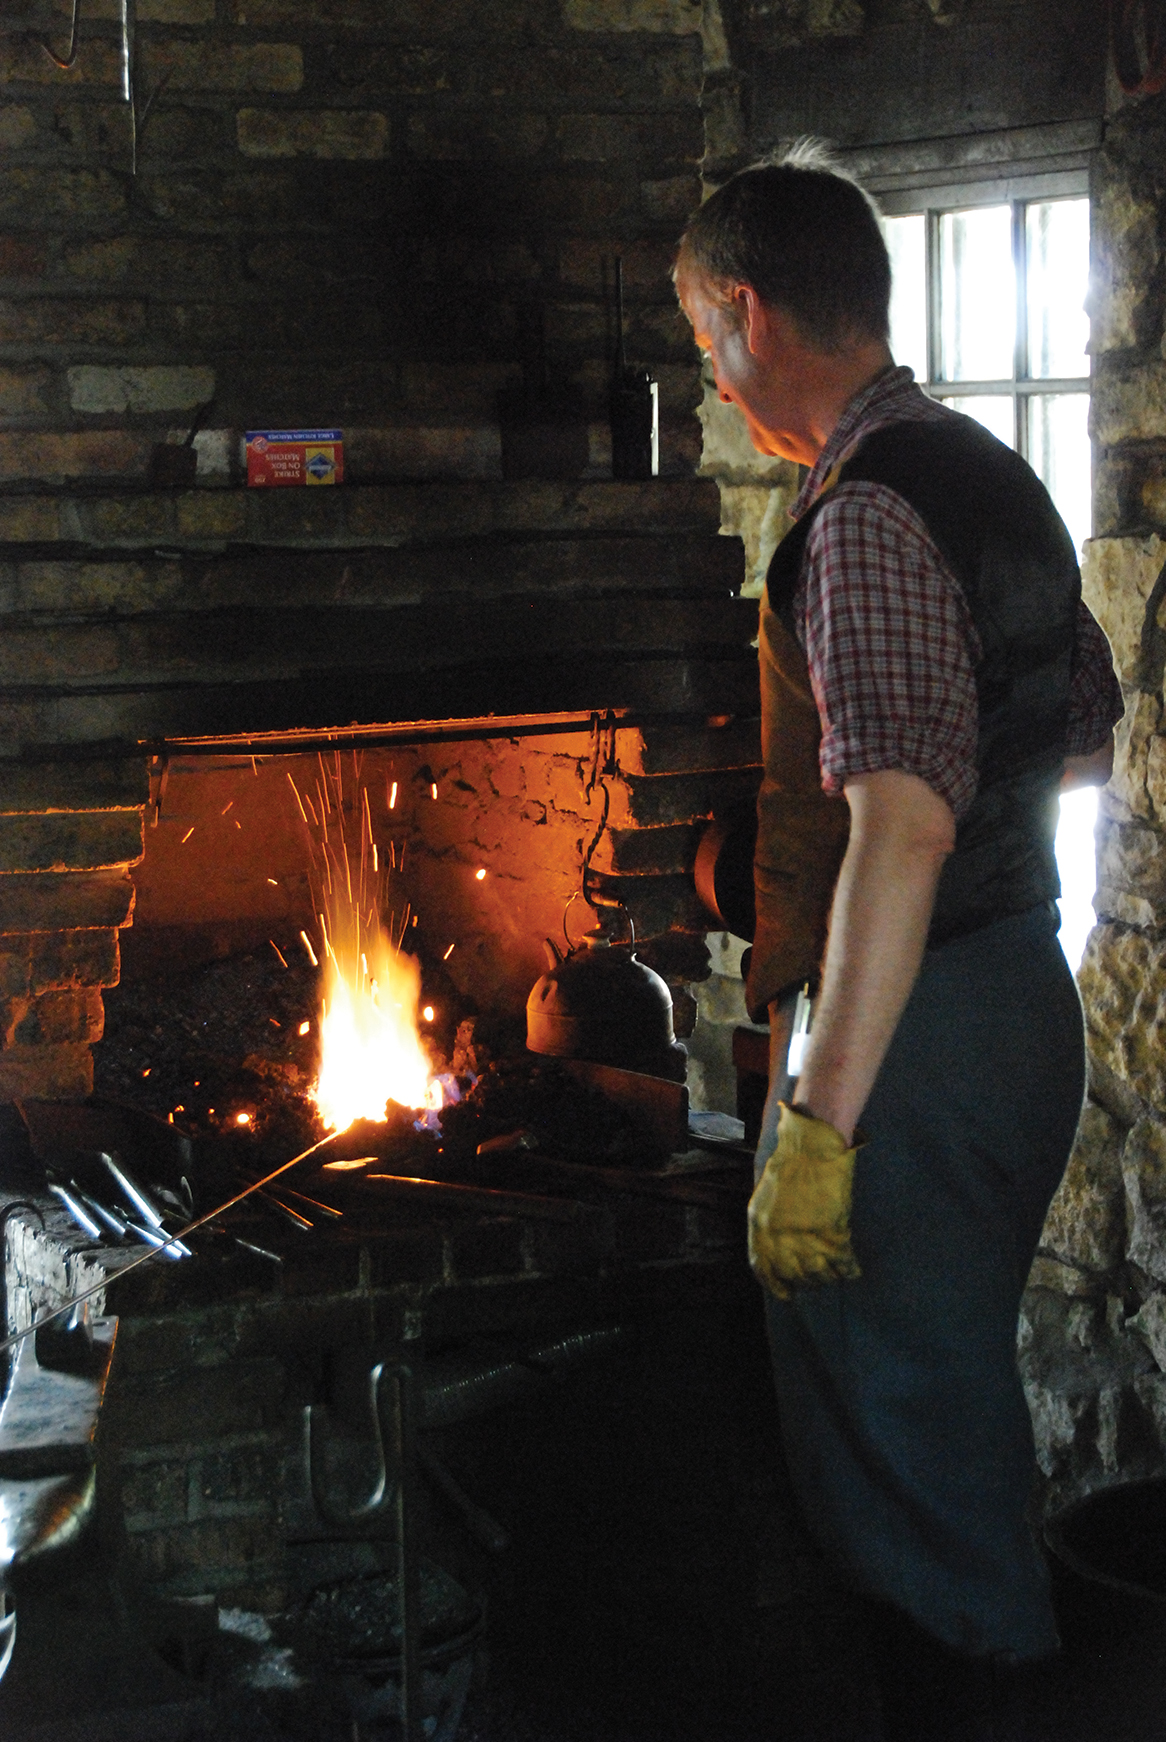 Blacksmith working at forge in Blacksmith Shop